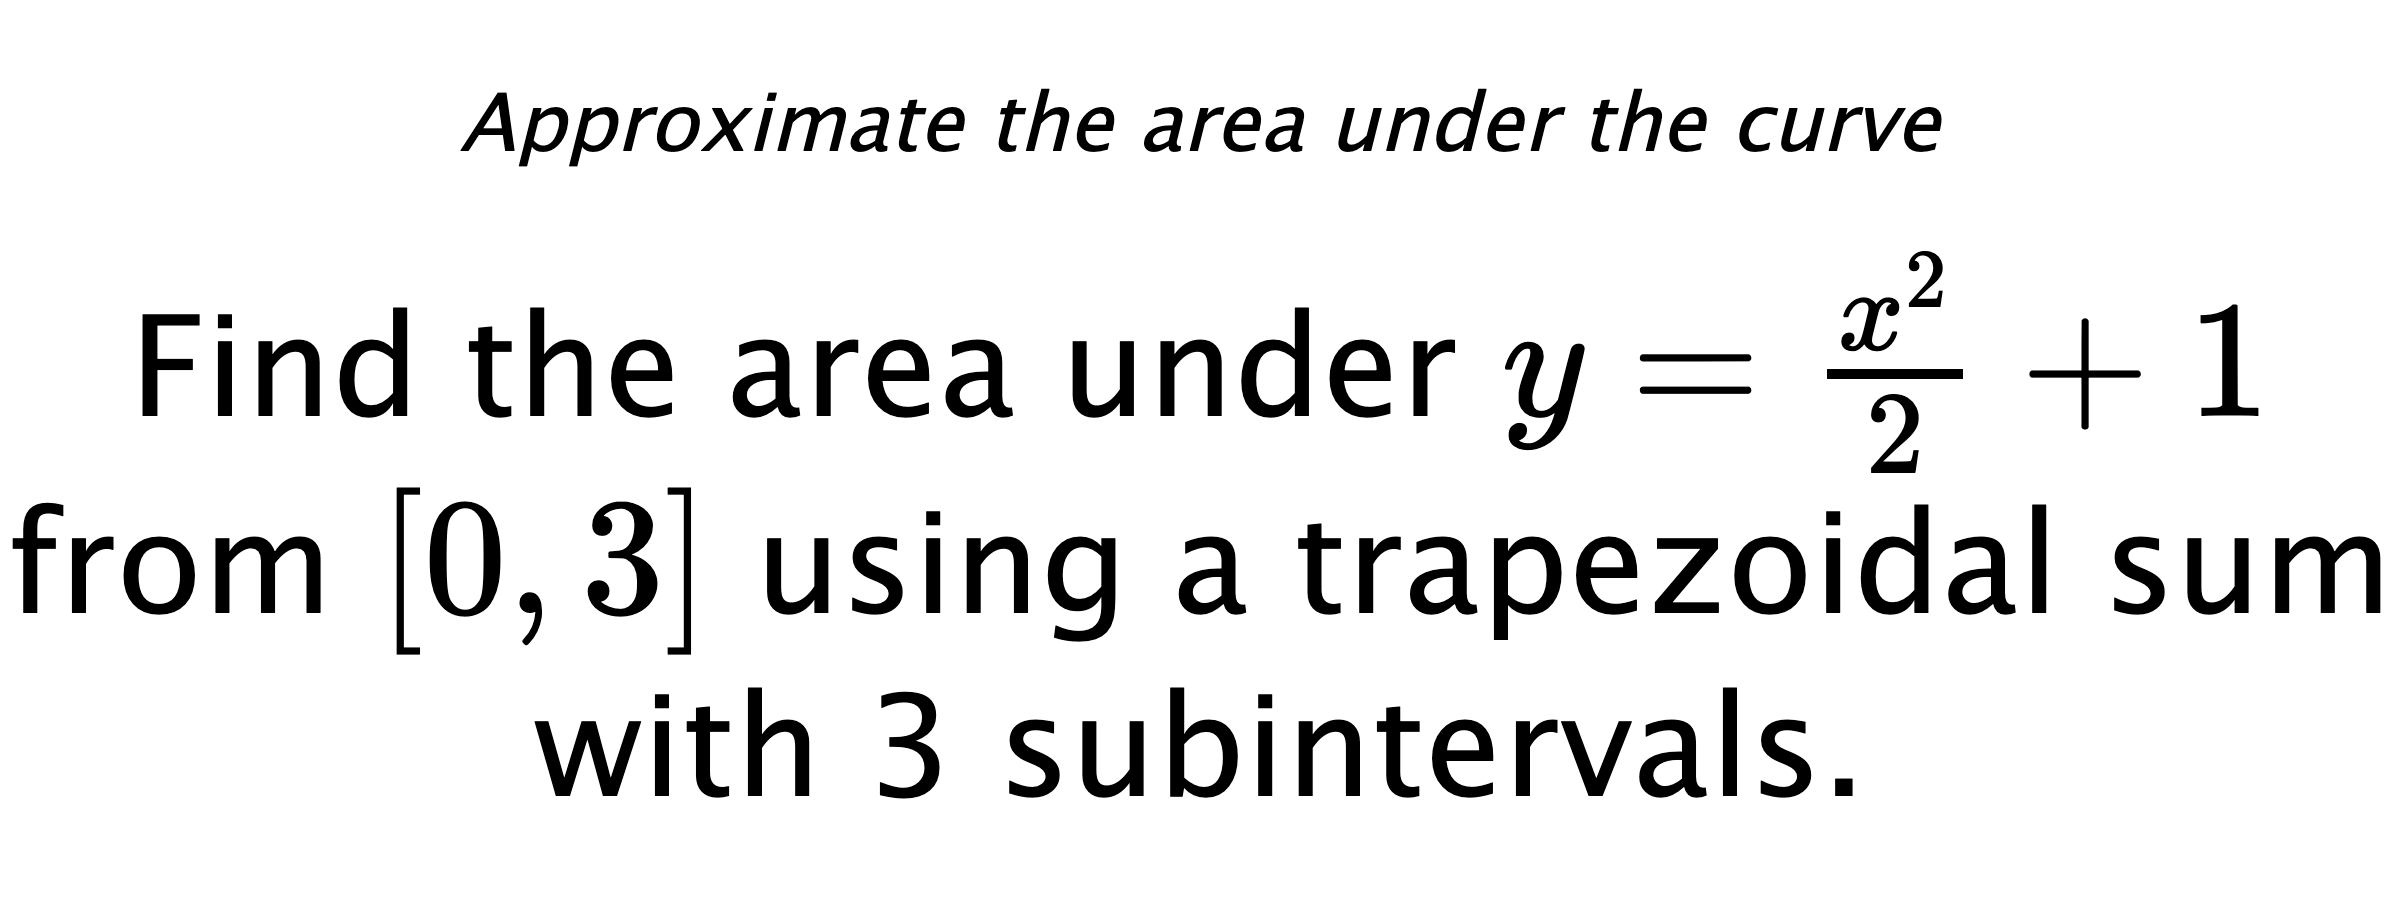 Approximate the area under the curve Find the area under $ y=\frac{x^2}{2}+1 $ from $ [0,3] $ using a trapezoidal sum with 3 subintervals.